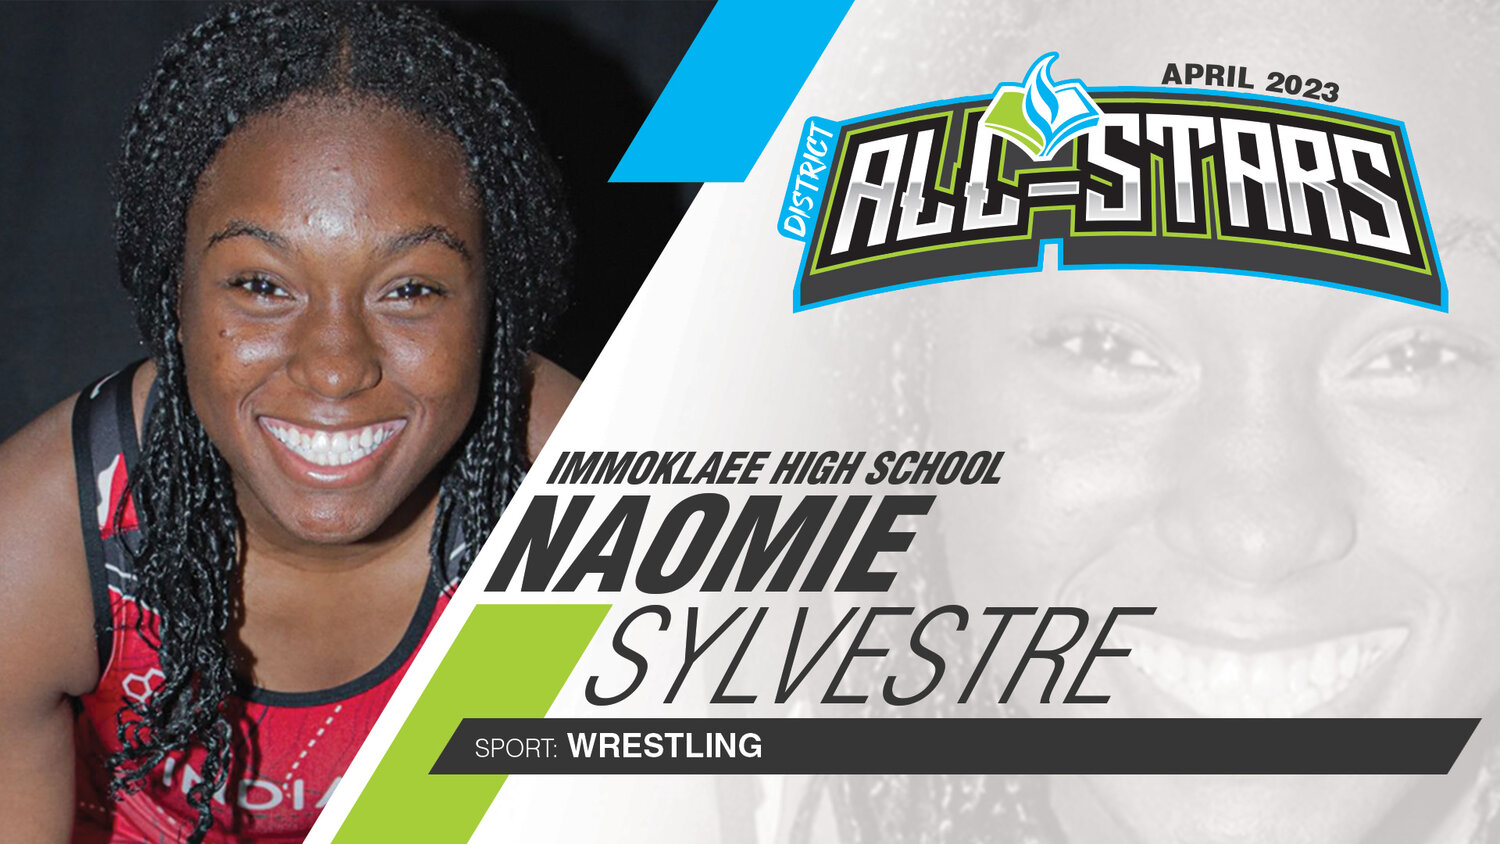 Naomie Sylvestre is a junior here at Immokalee High School and one of the top wrestlers on our Indians’ girls wrestling team. She placed 3rd at Districts and won the Class 1A Region 3 Championship, which earned her a spot to compete at the FHSAA Girls State Wrestling Championship for the second straight year. Naomie finished the season with a strong 23-10 record. The future is certainly bright for this fierce competitor. #CCPSProud